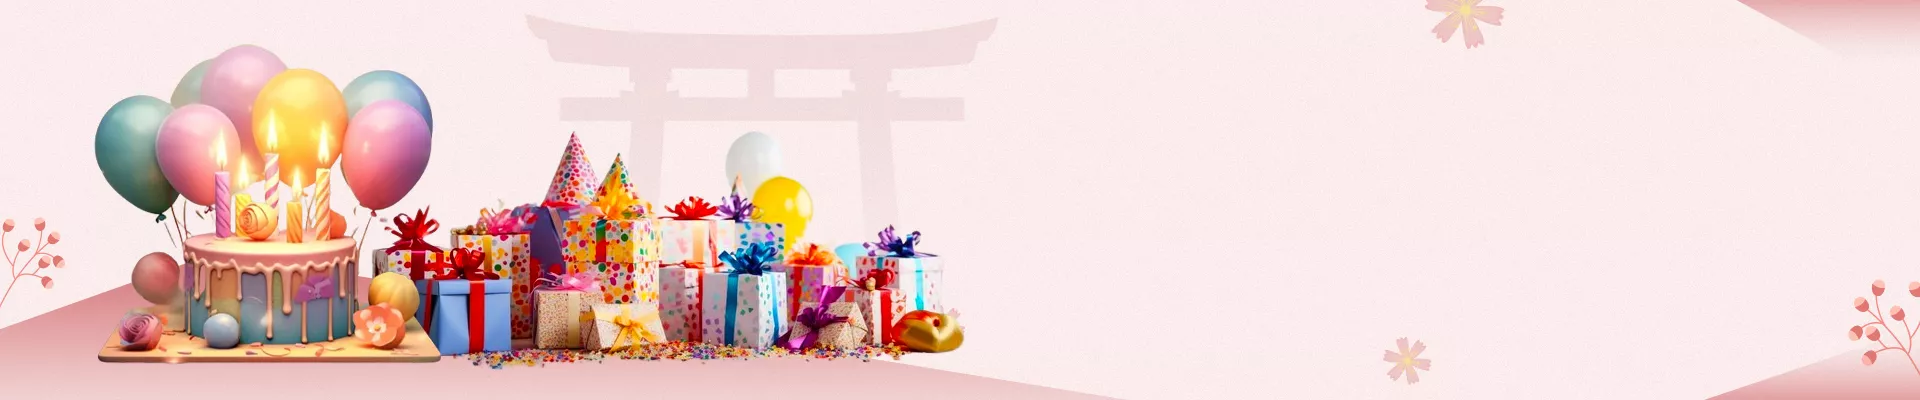 Send Birthday Gifts to Japan